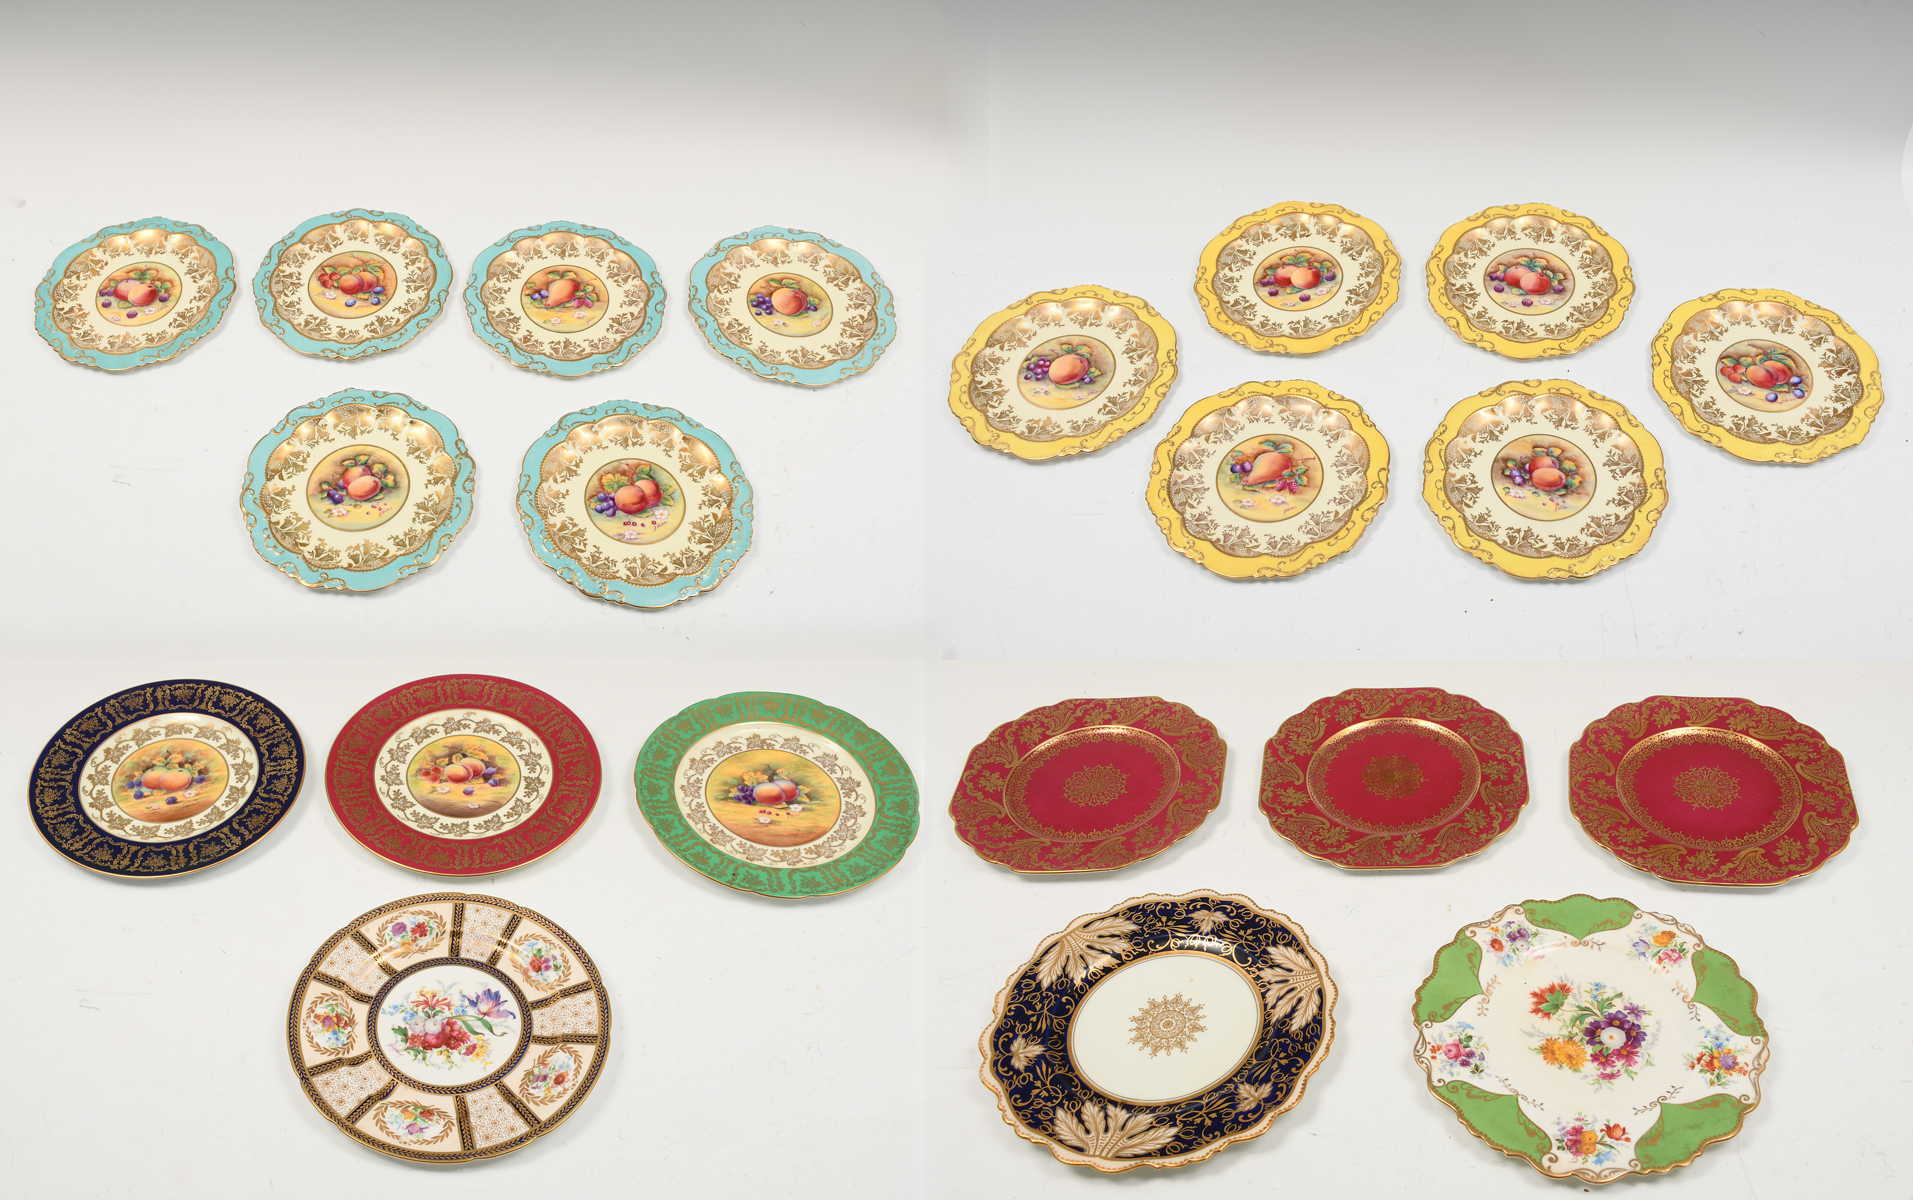 21 PC. PARAGON PLATE COLLECTION: